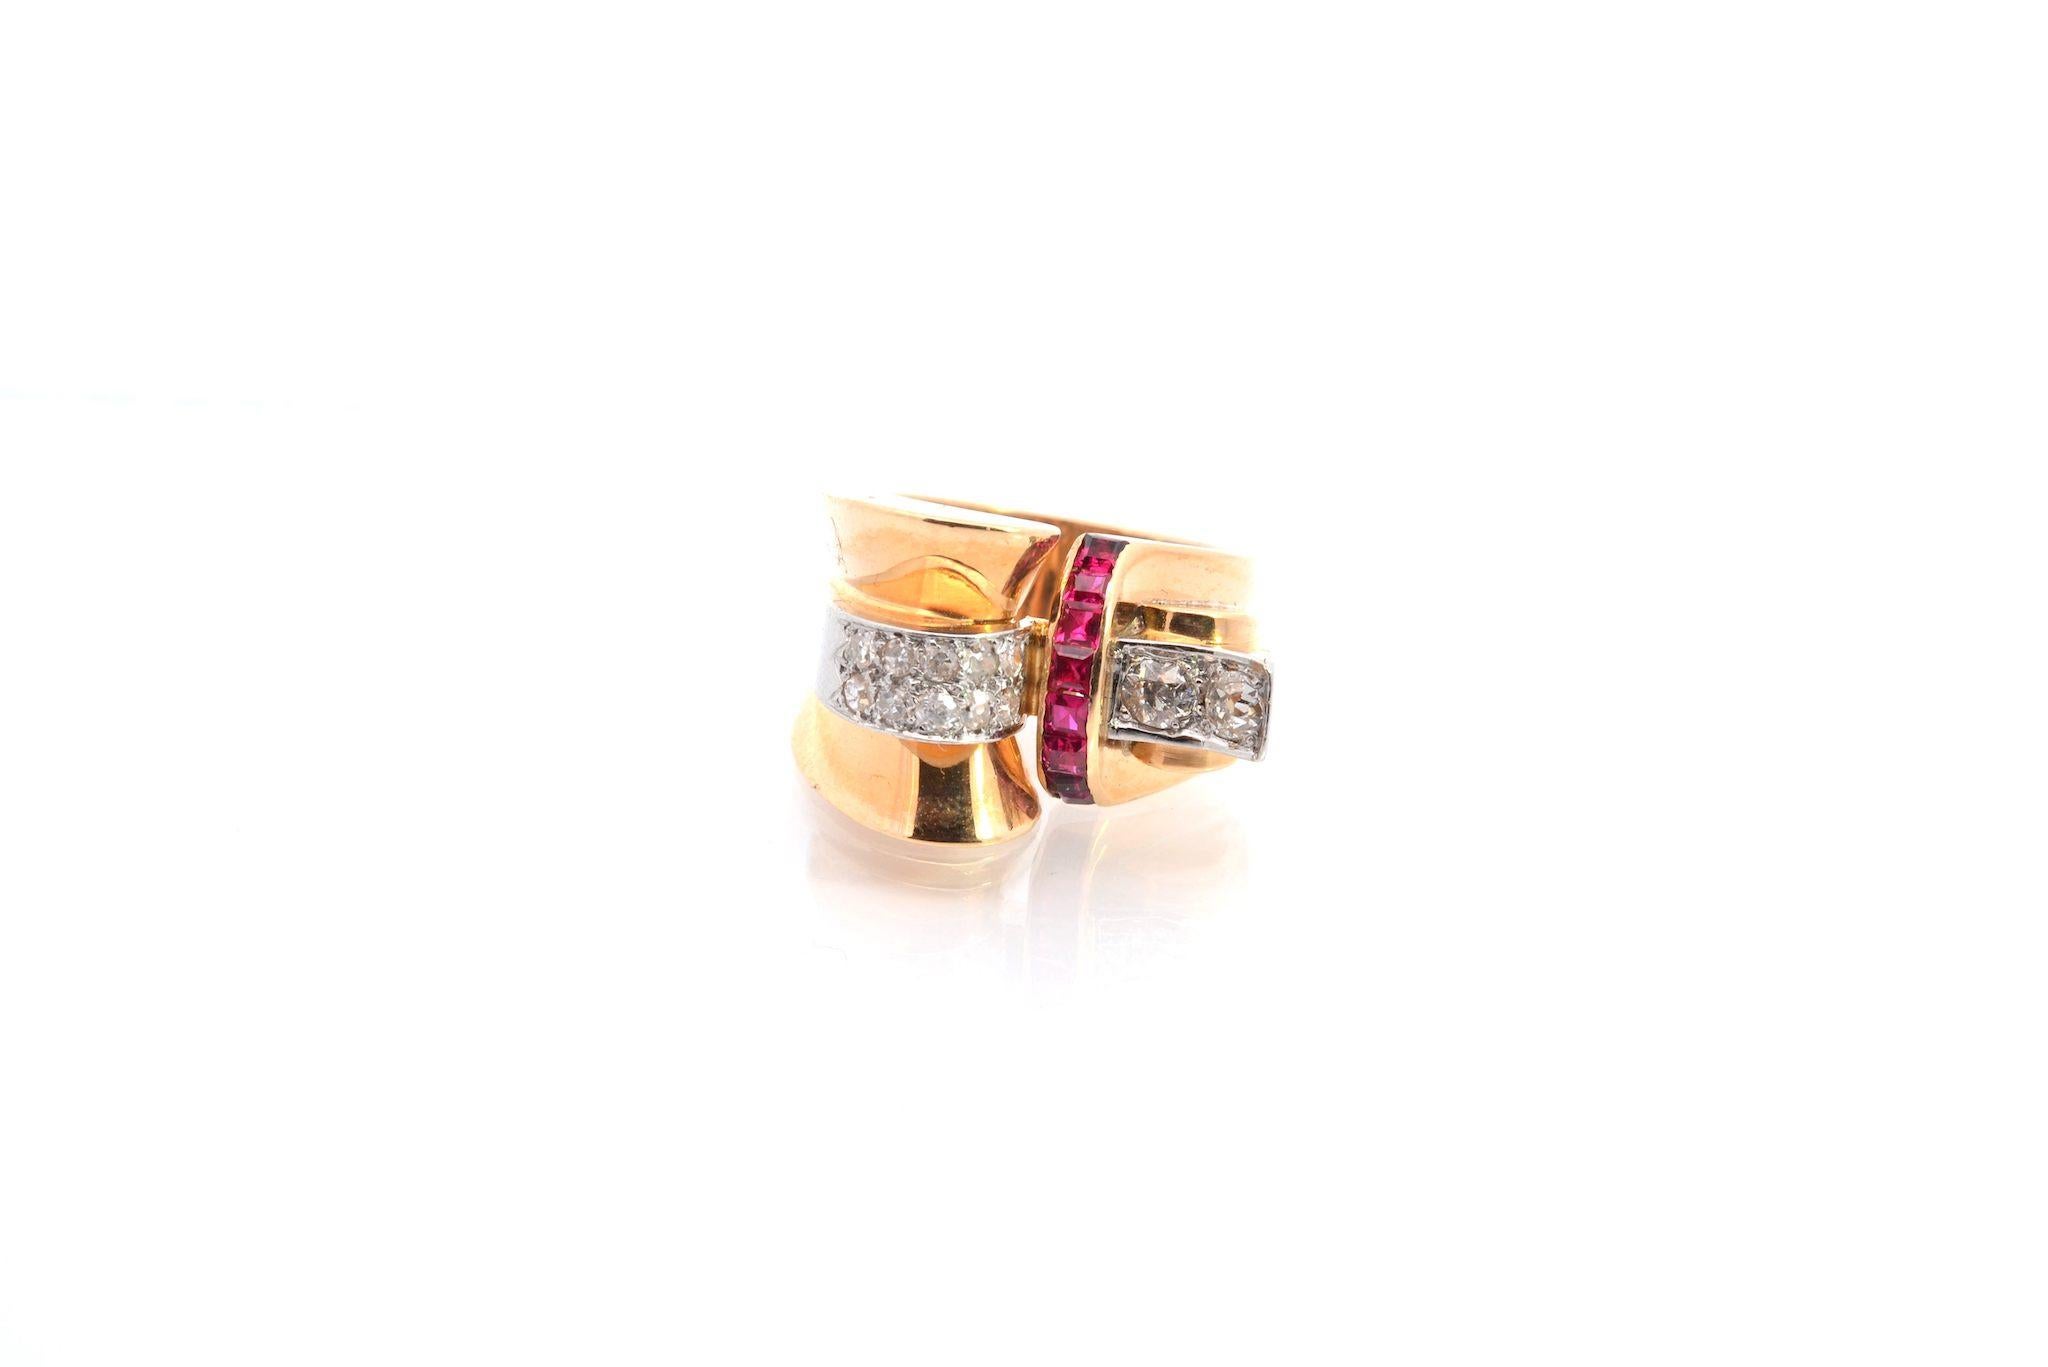 Stones: 12 brilliants: 0.80ct, 8 calibrated rubies: 0.55ct
Material: Yellow gold and platinum
Weight: 13.4g
Period: 1940
Size: 51 (free sizing)
Certificate
Ref. : 25372